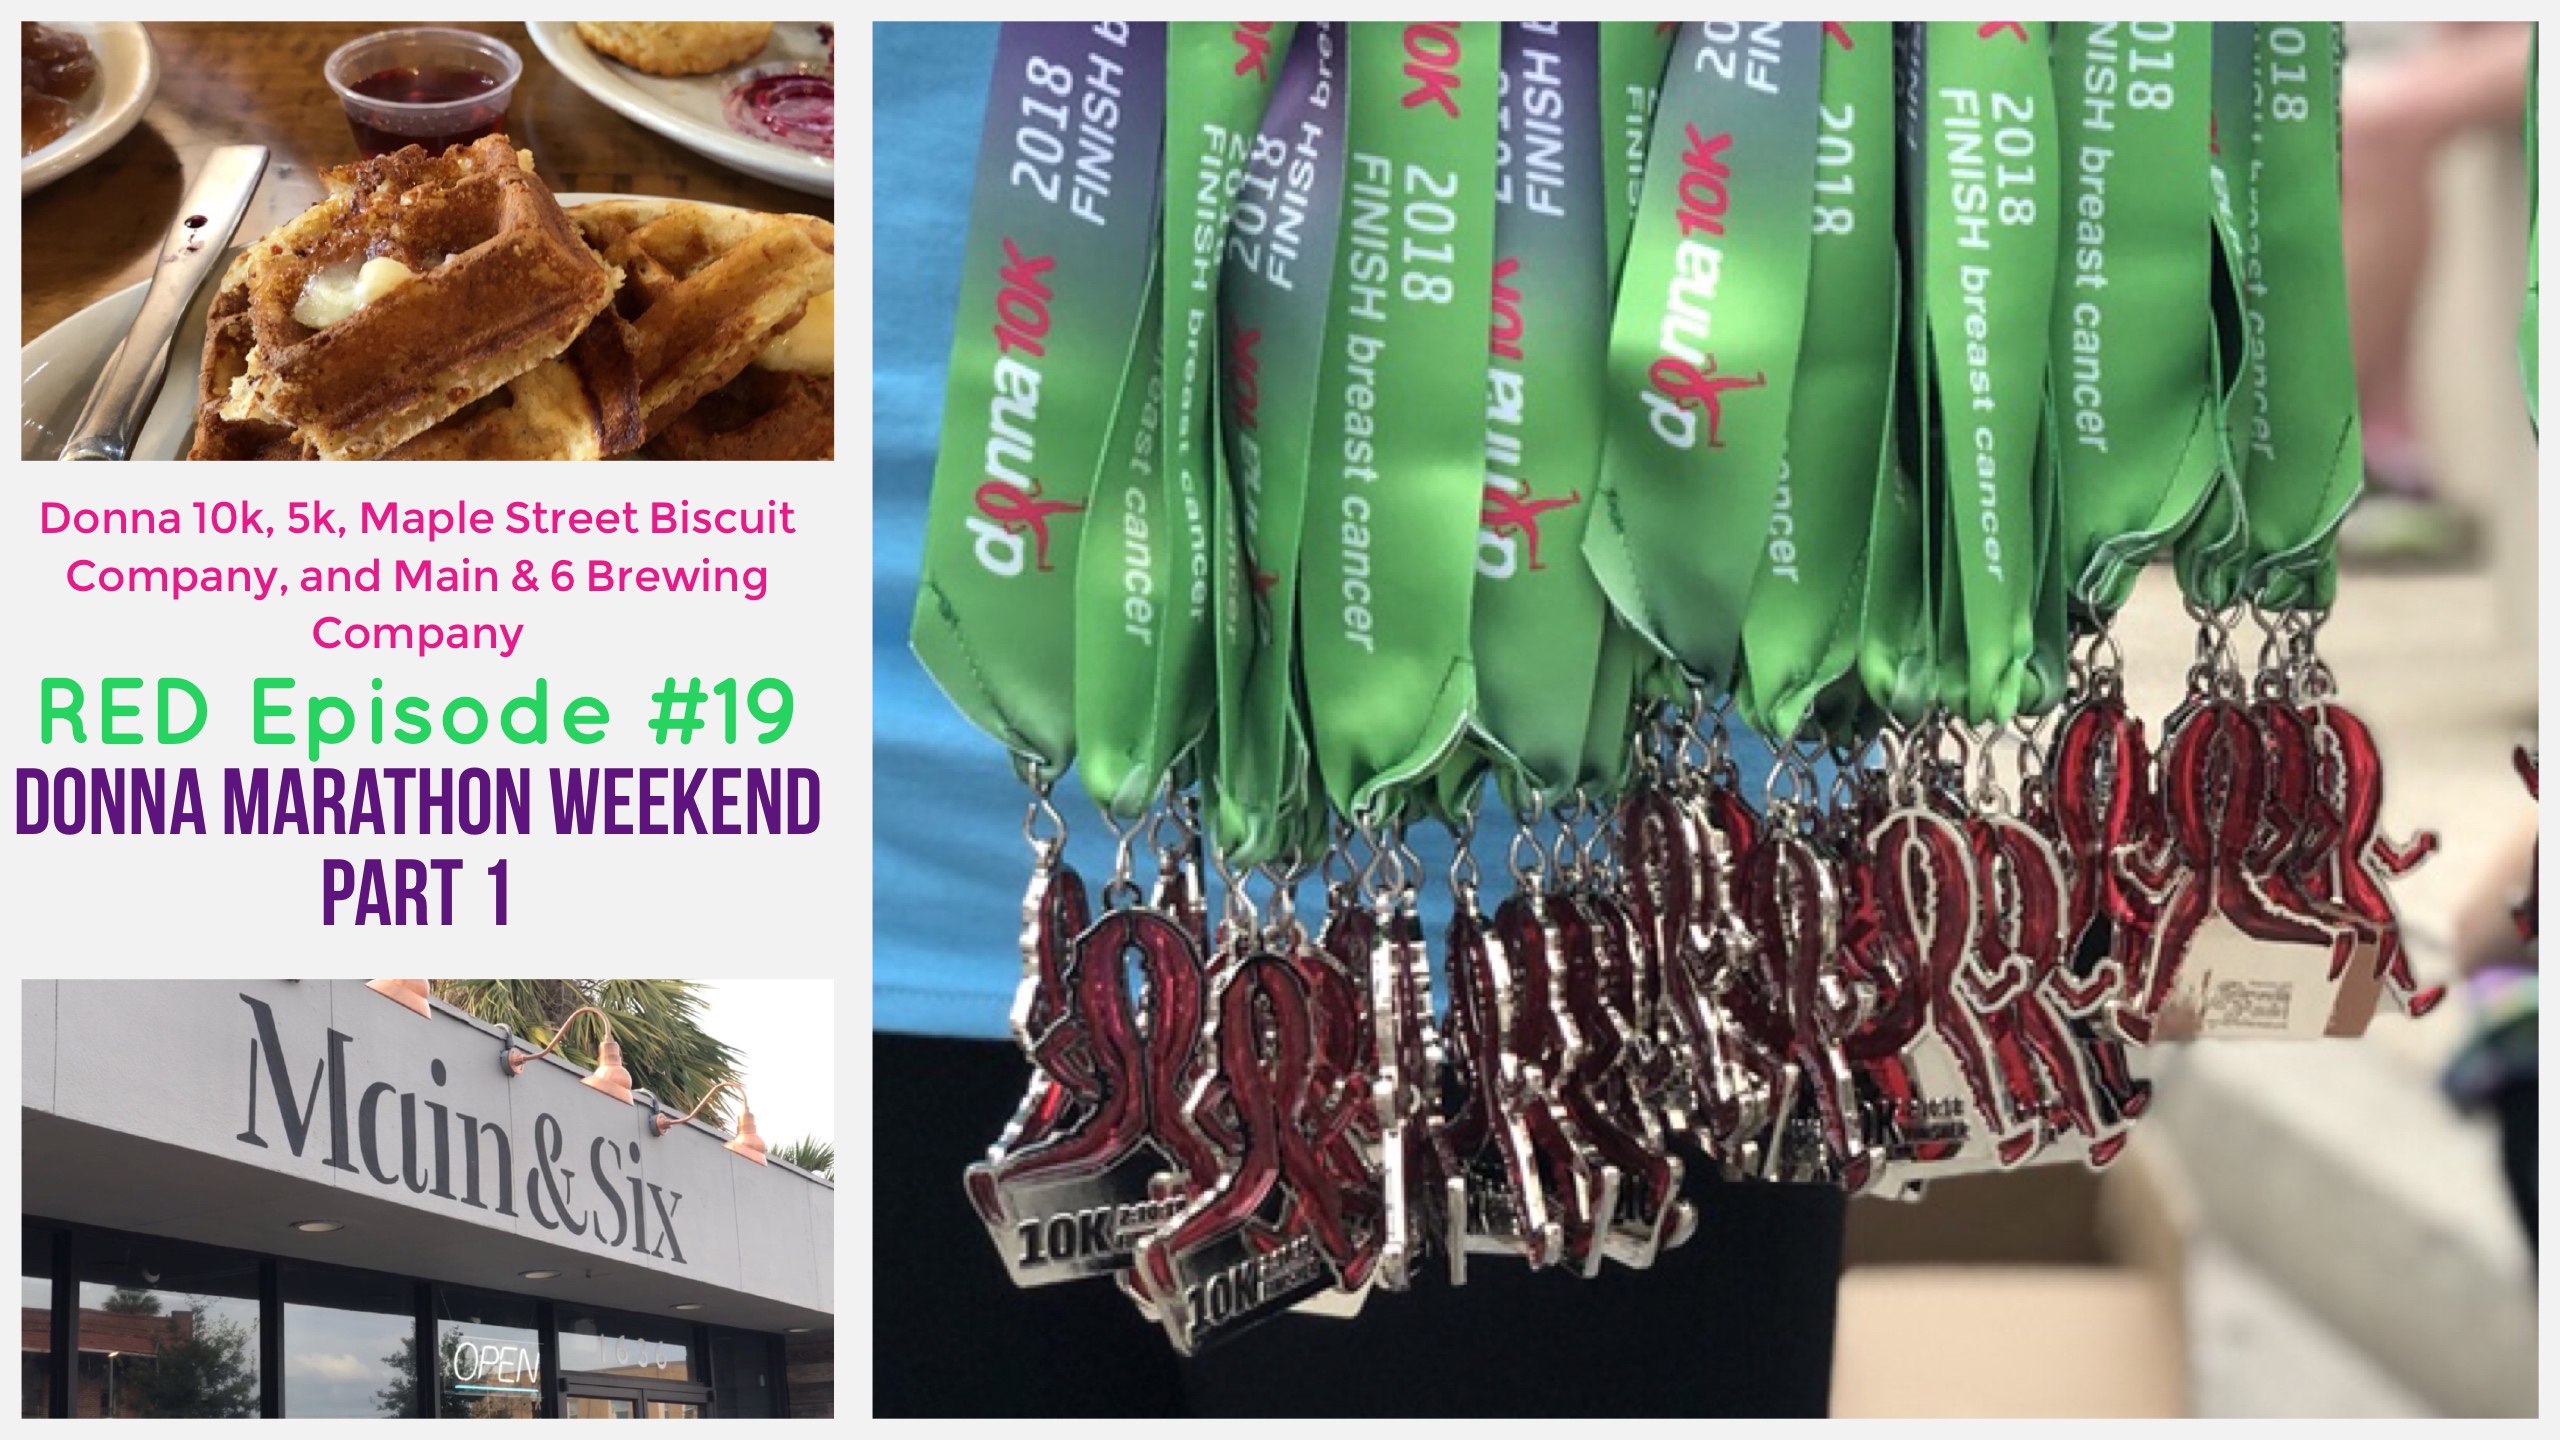 RED Episode #19 Donna Marathon Weekend Part 1: 10K, 5K, Maple Street Biscuit Company, and Main & Six Brewing Company